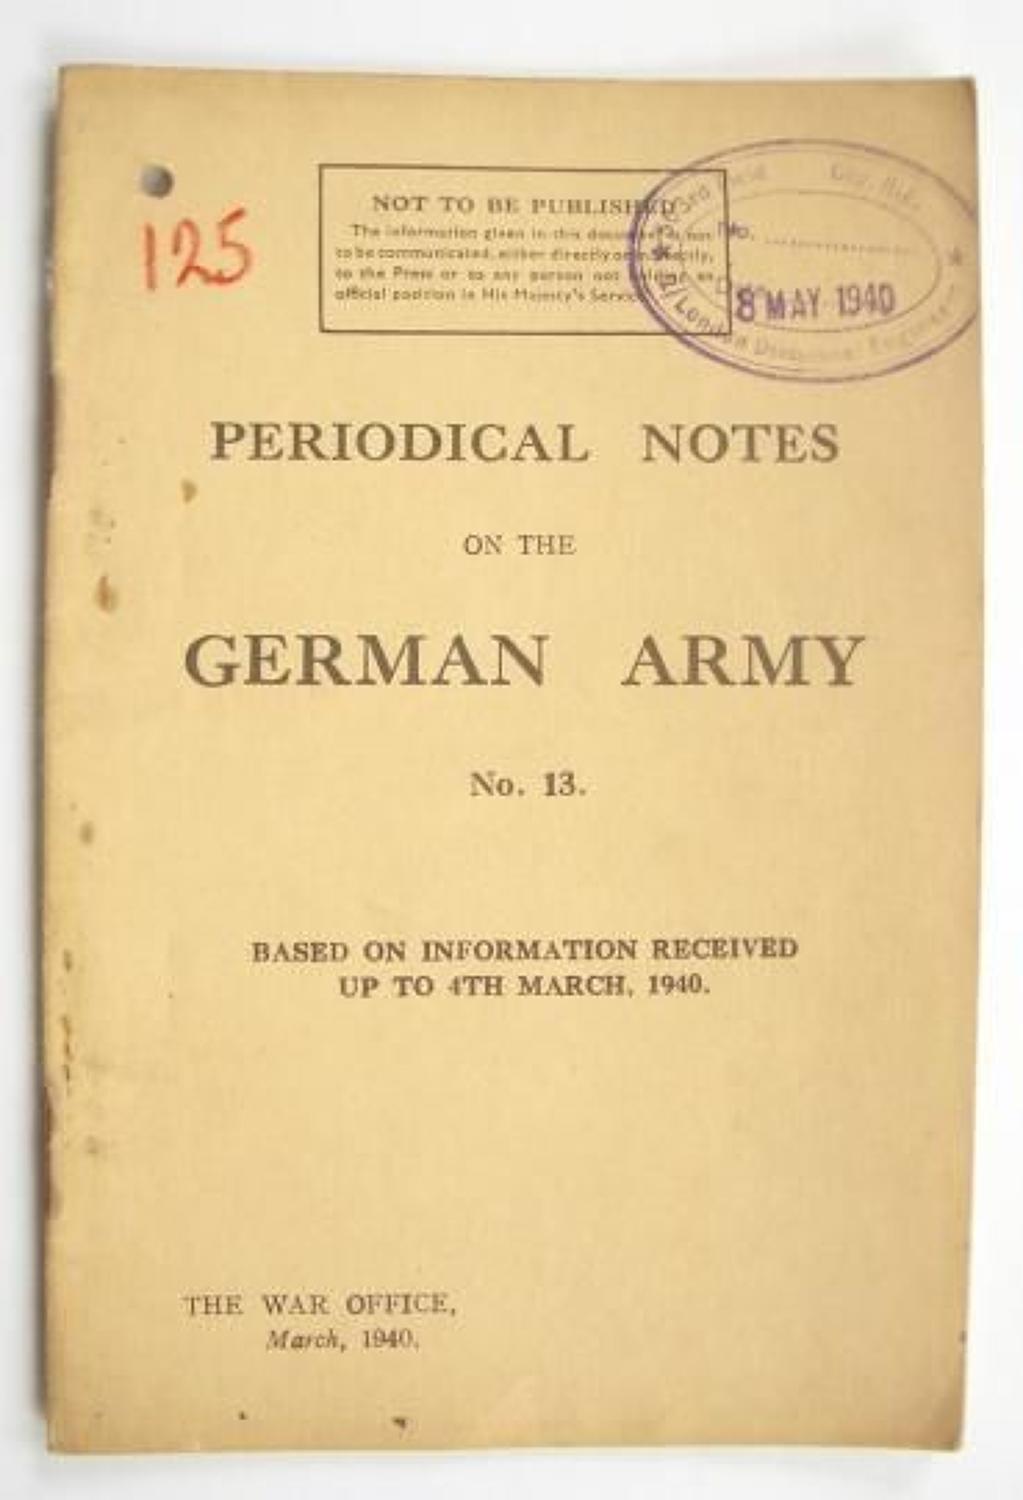 WW2 War Department Issue March 1940 Periodical Note on the German Army